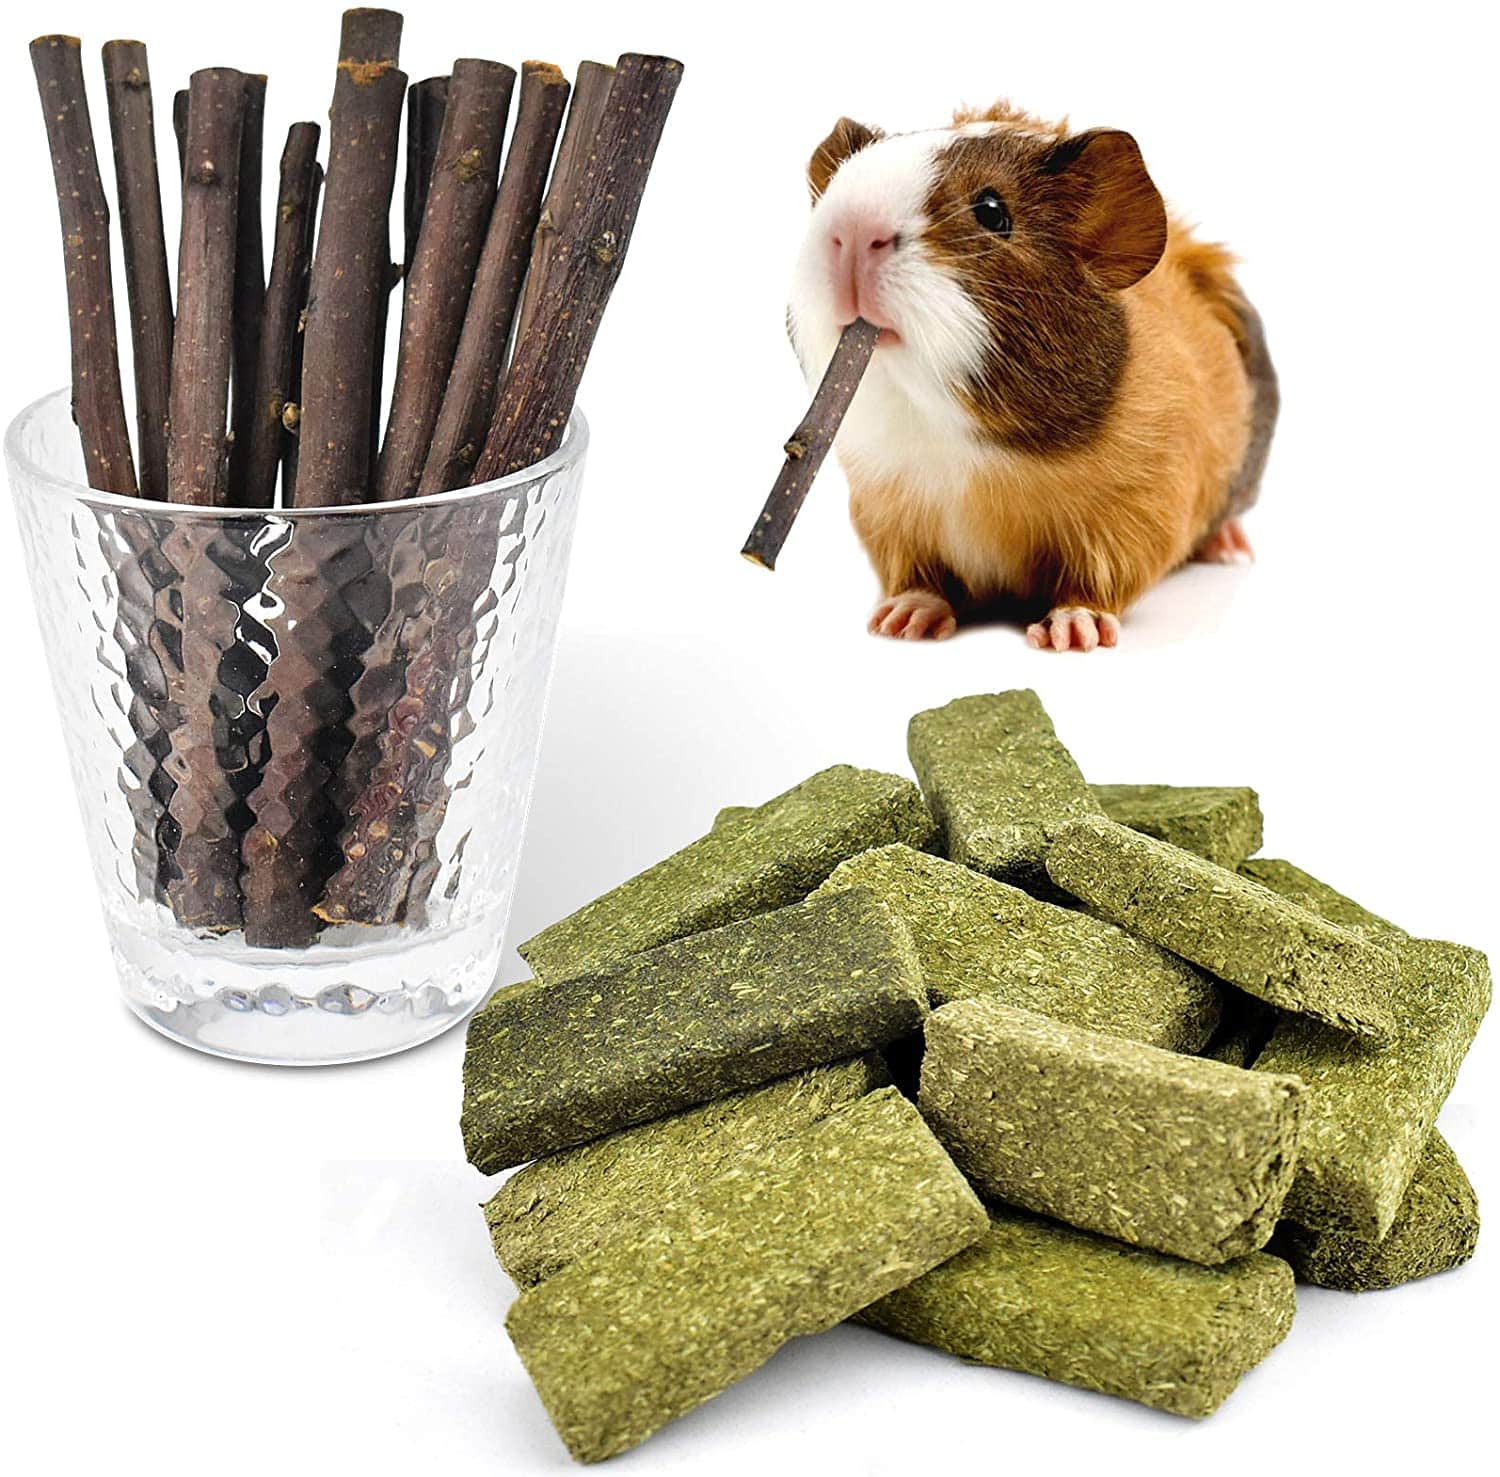 a guinea pig in a glass with a stick in its mouth